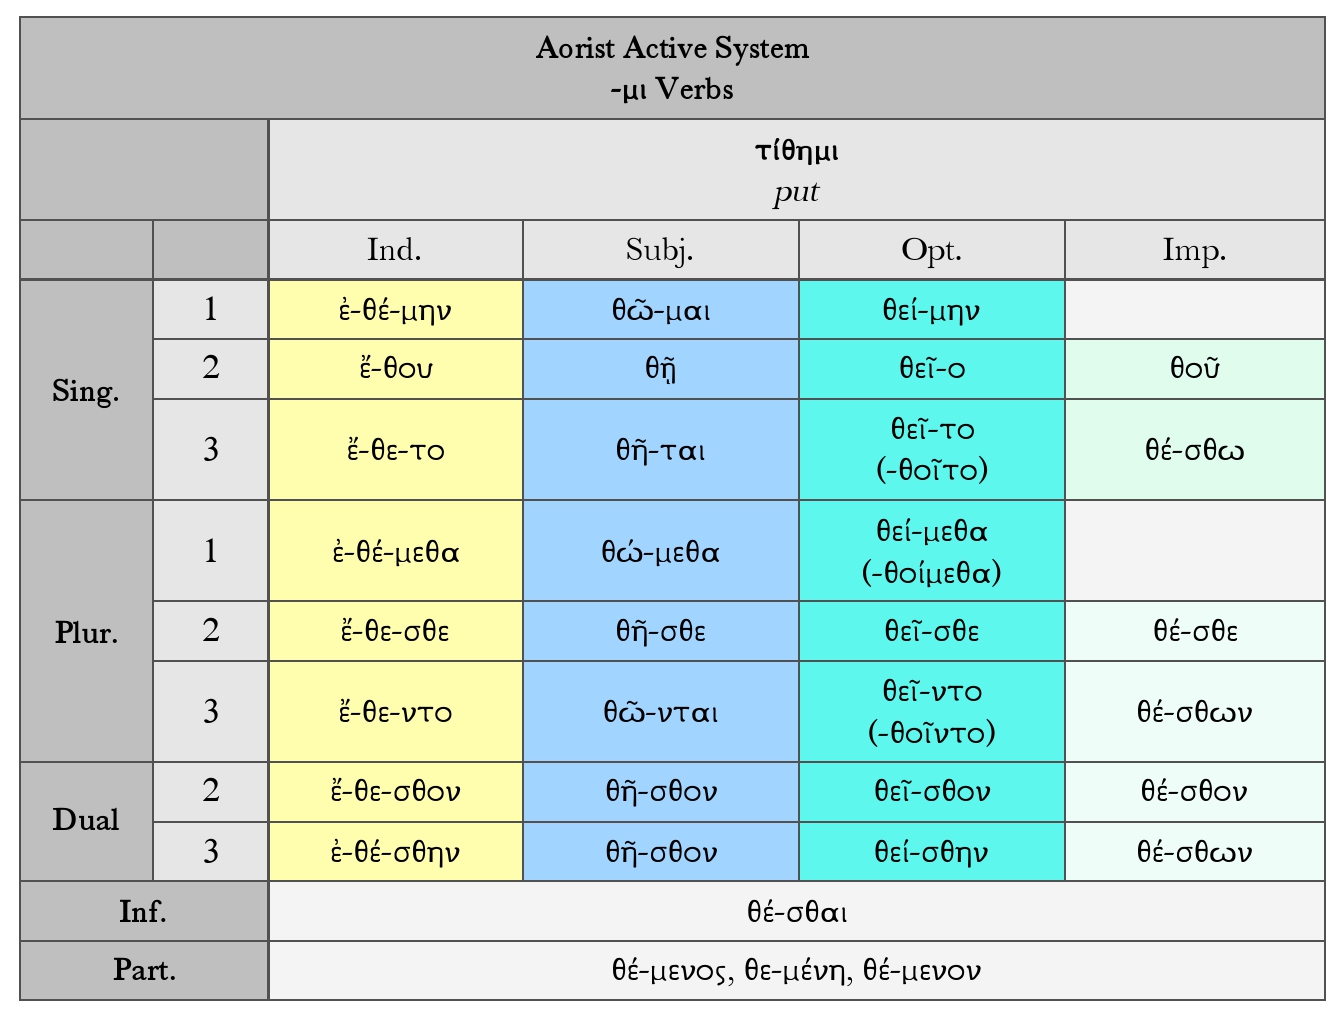 Goodell: Greek -μι Verbs Aorist Middle System Chart for τίθημι